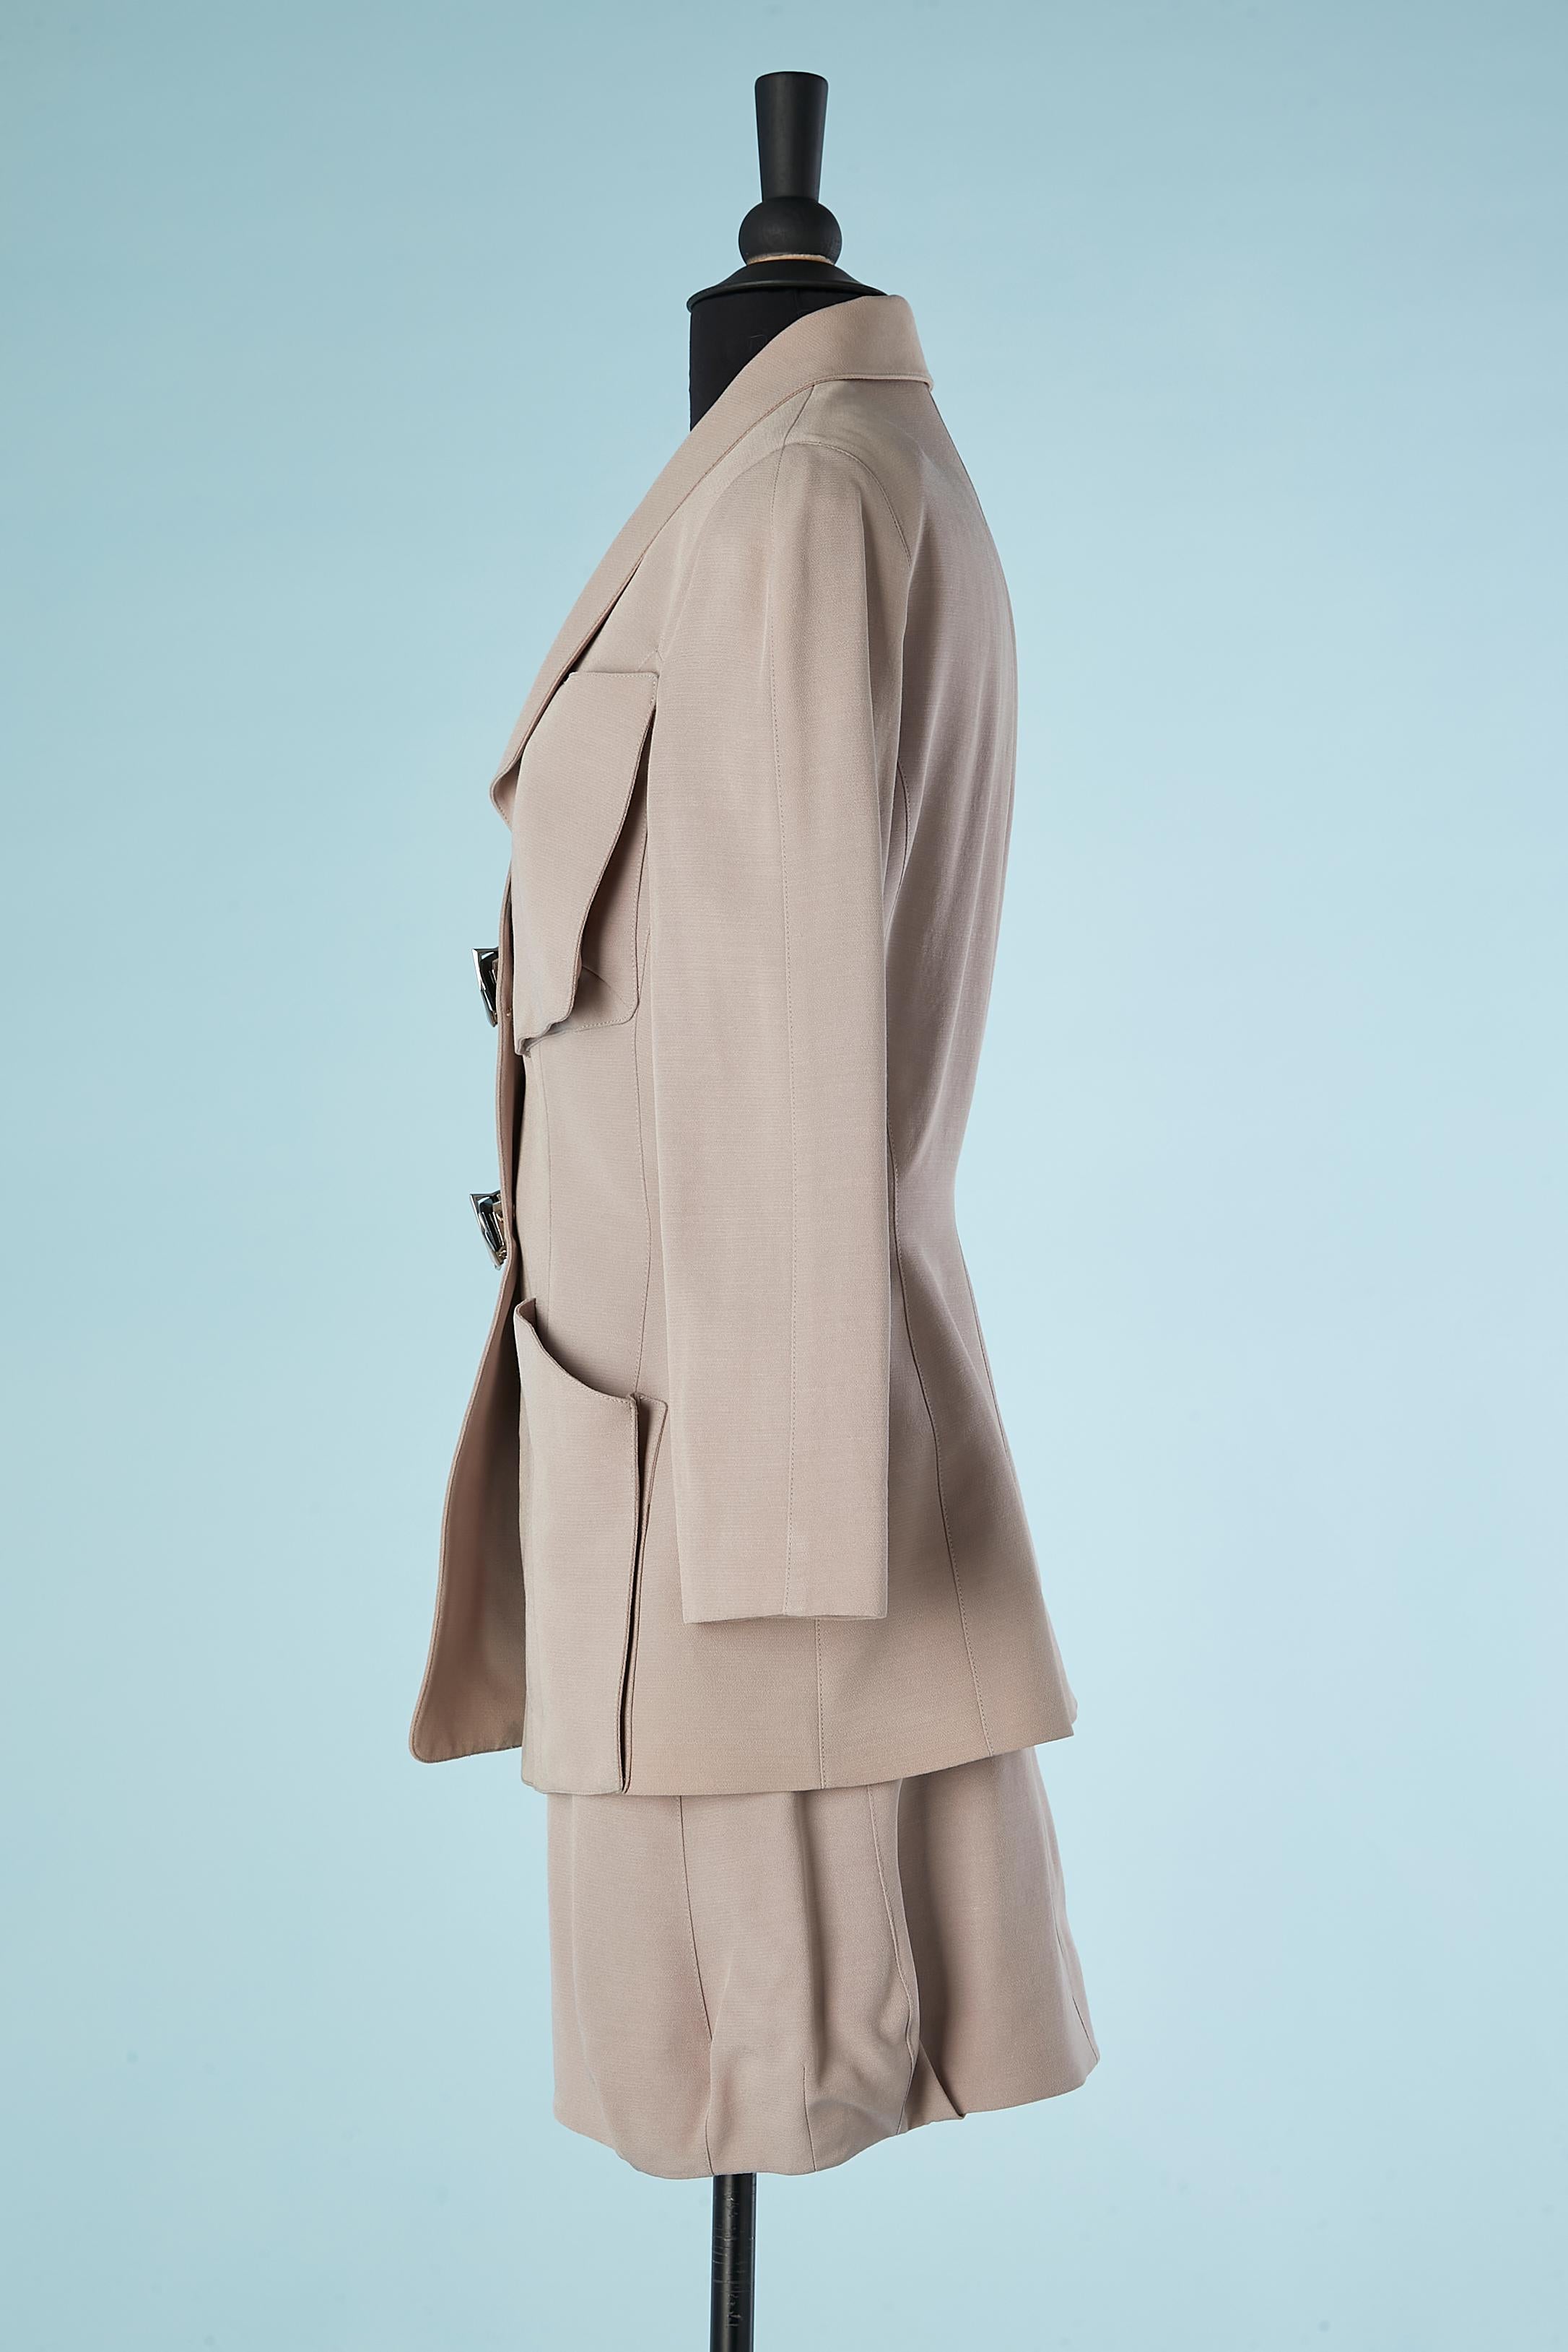 Greyish-Lilak wool skirt- suit  with jewlery snap Thierry Mugler Circa 1990's  For Sale 2